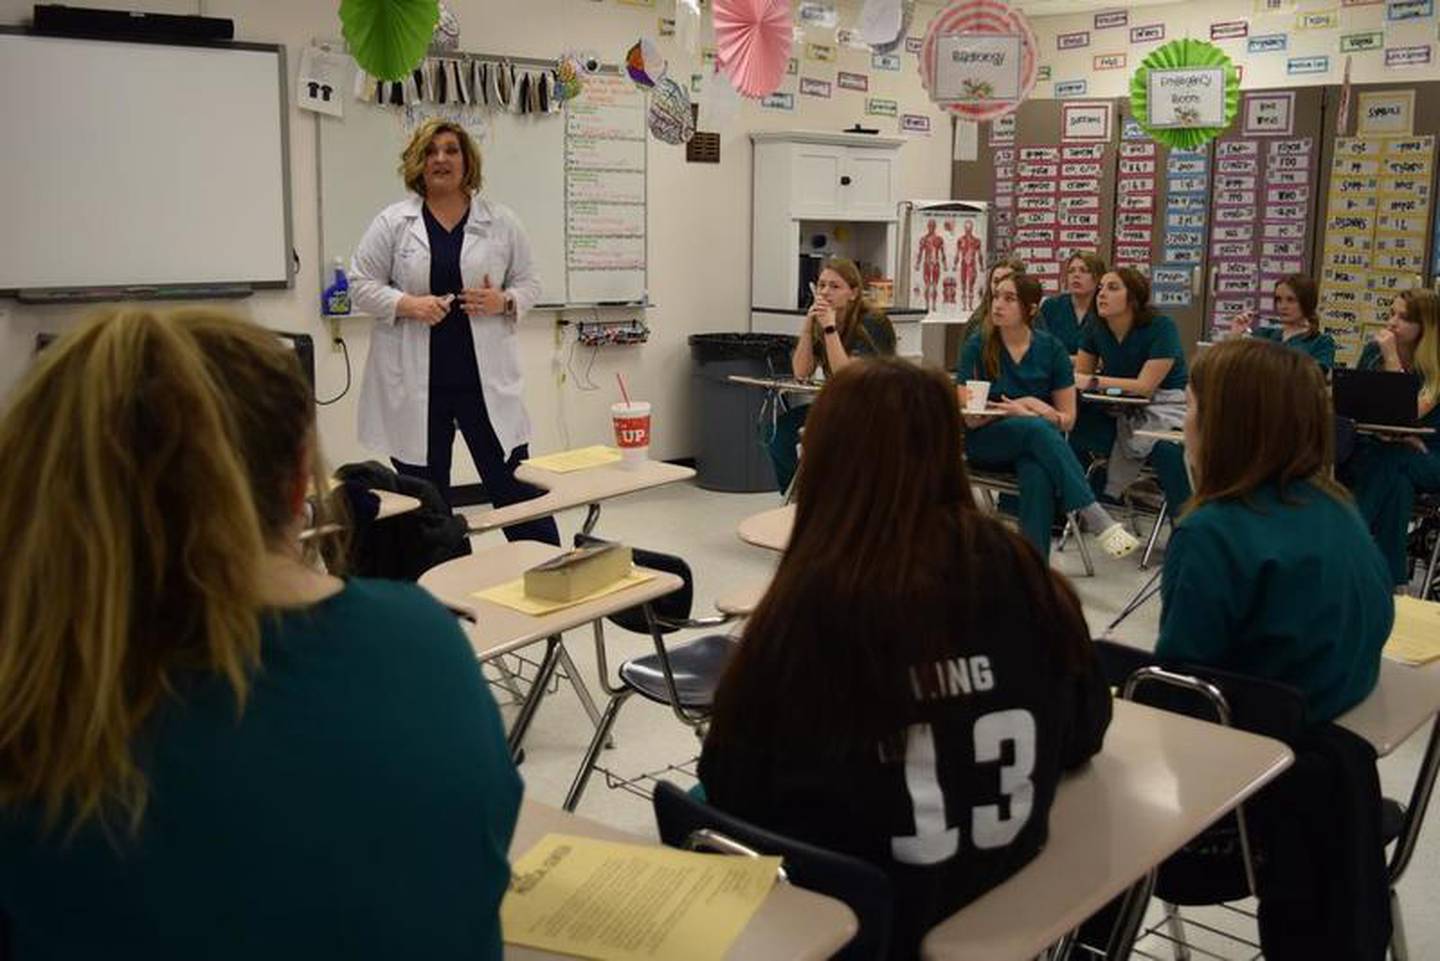 GAVC Health Occupations instructor Jennifer Shell, RN, talks to students about their medical simulation event, which was held on Friday, Feb. 7 at the GAVC campus in Morris.